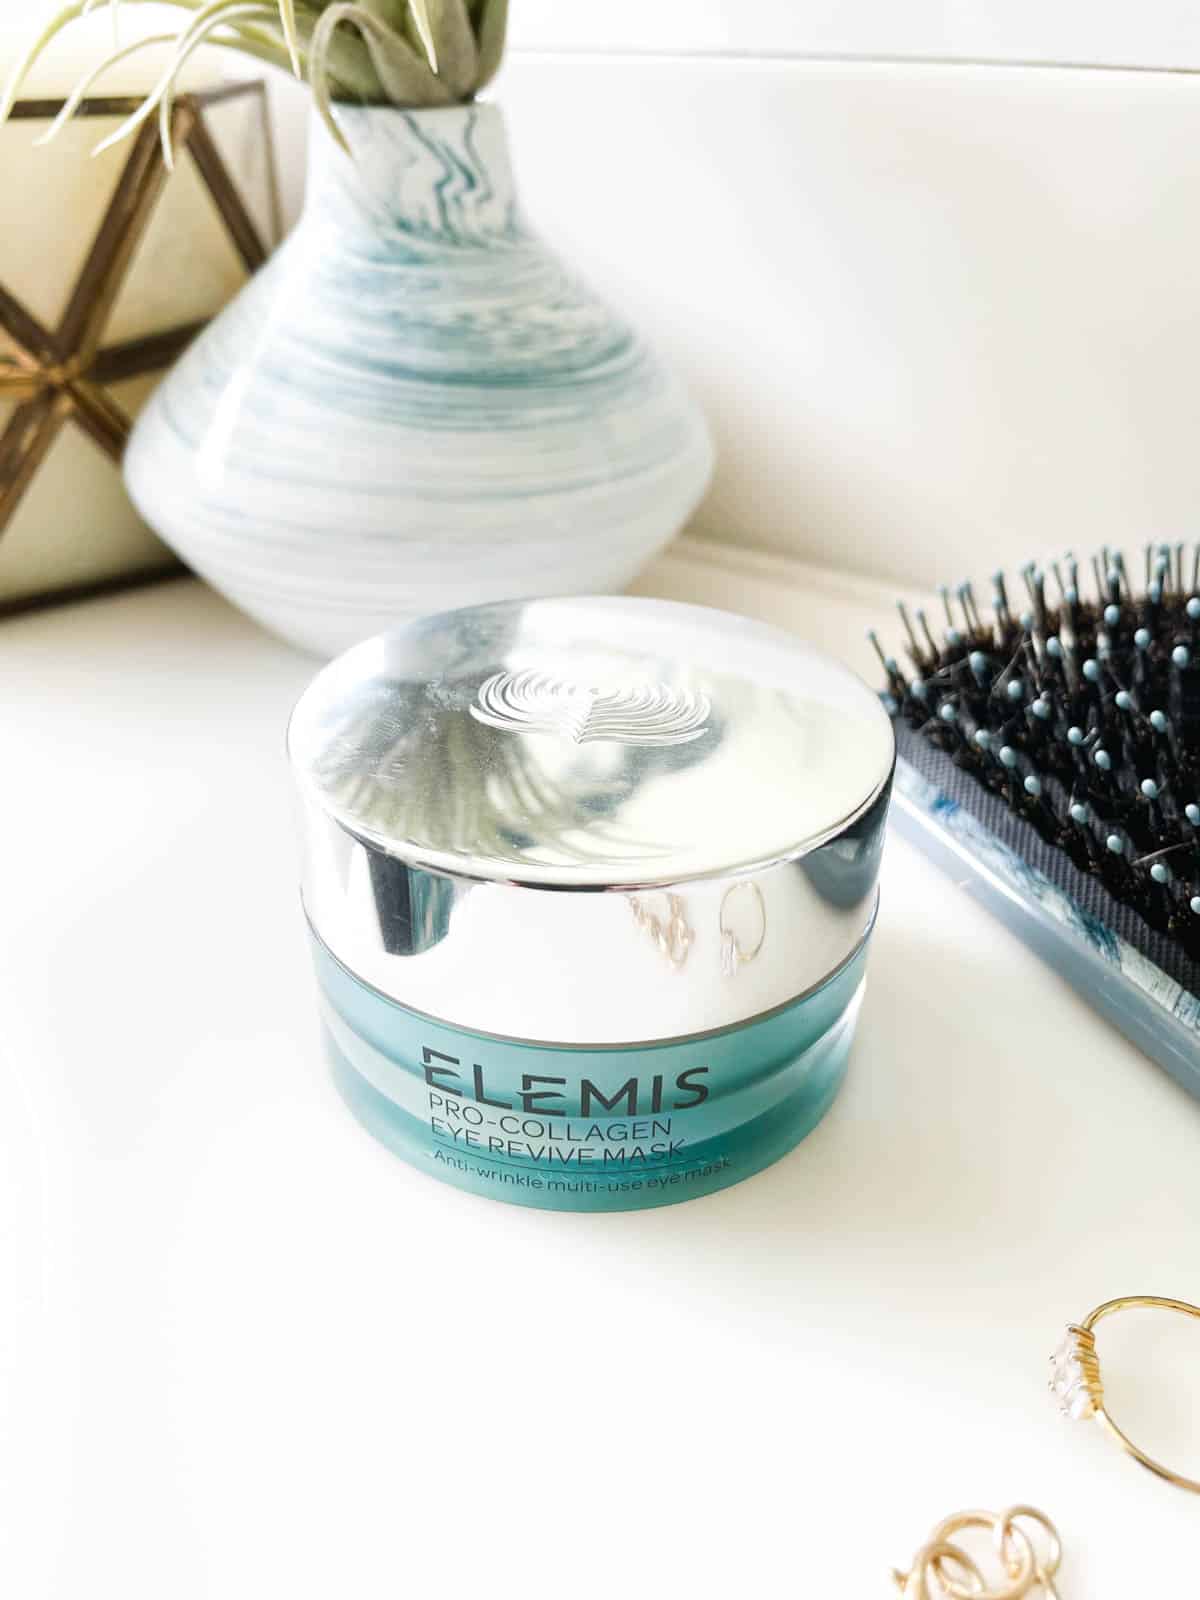 Close up of a jar of Elemis Pro-Collagen Eye Revive Mask on a counter.